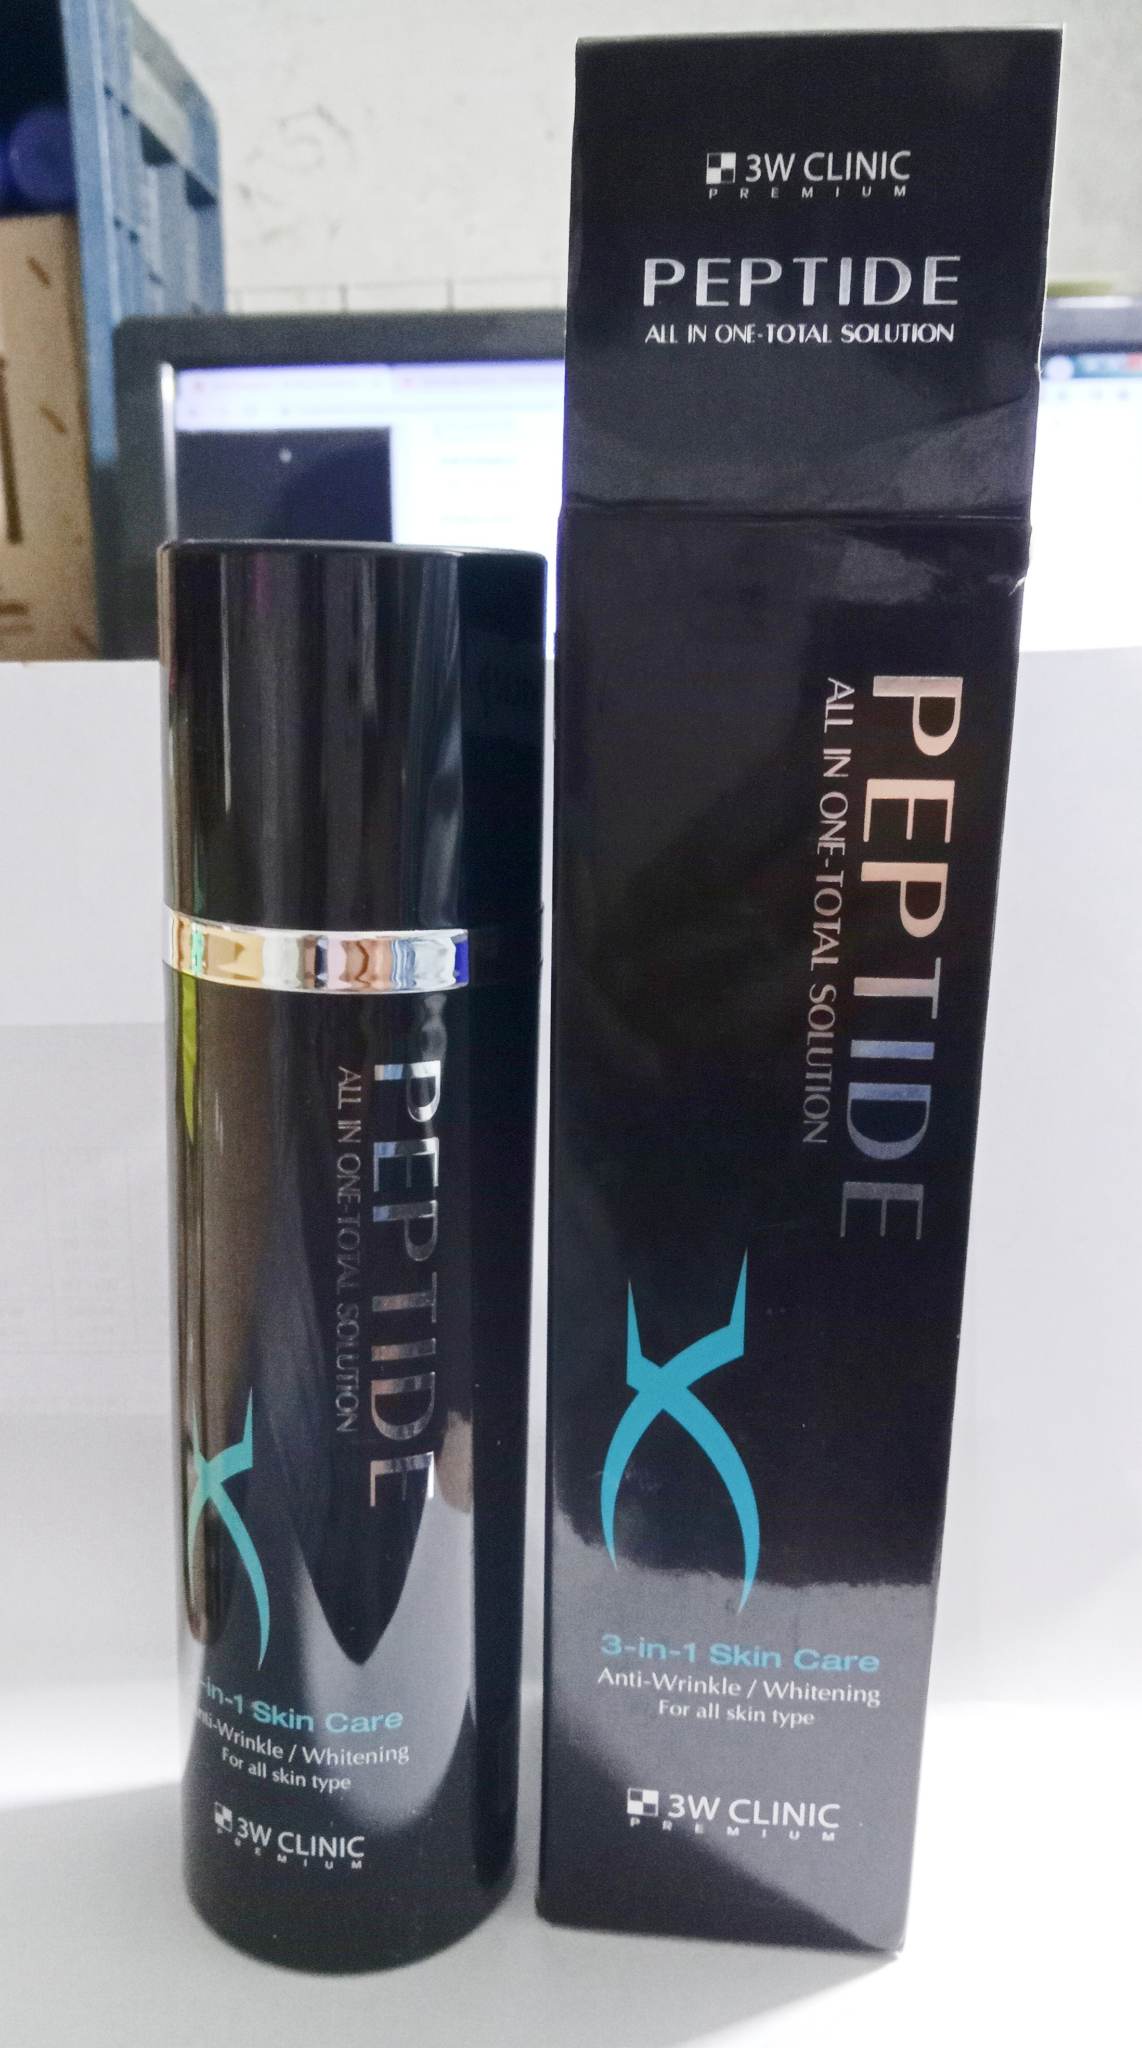 Peptide All In one Total Solution 3-in-1 Skin Care Anti-Wrinkle/Whitening For all Skin Type (Korean)